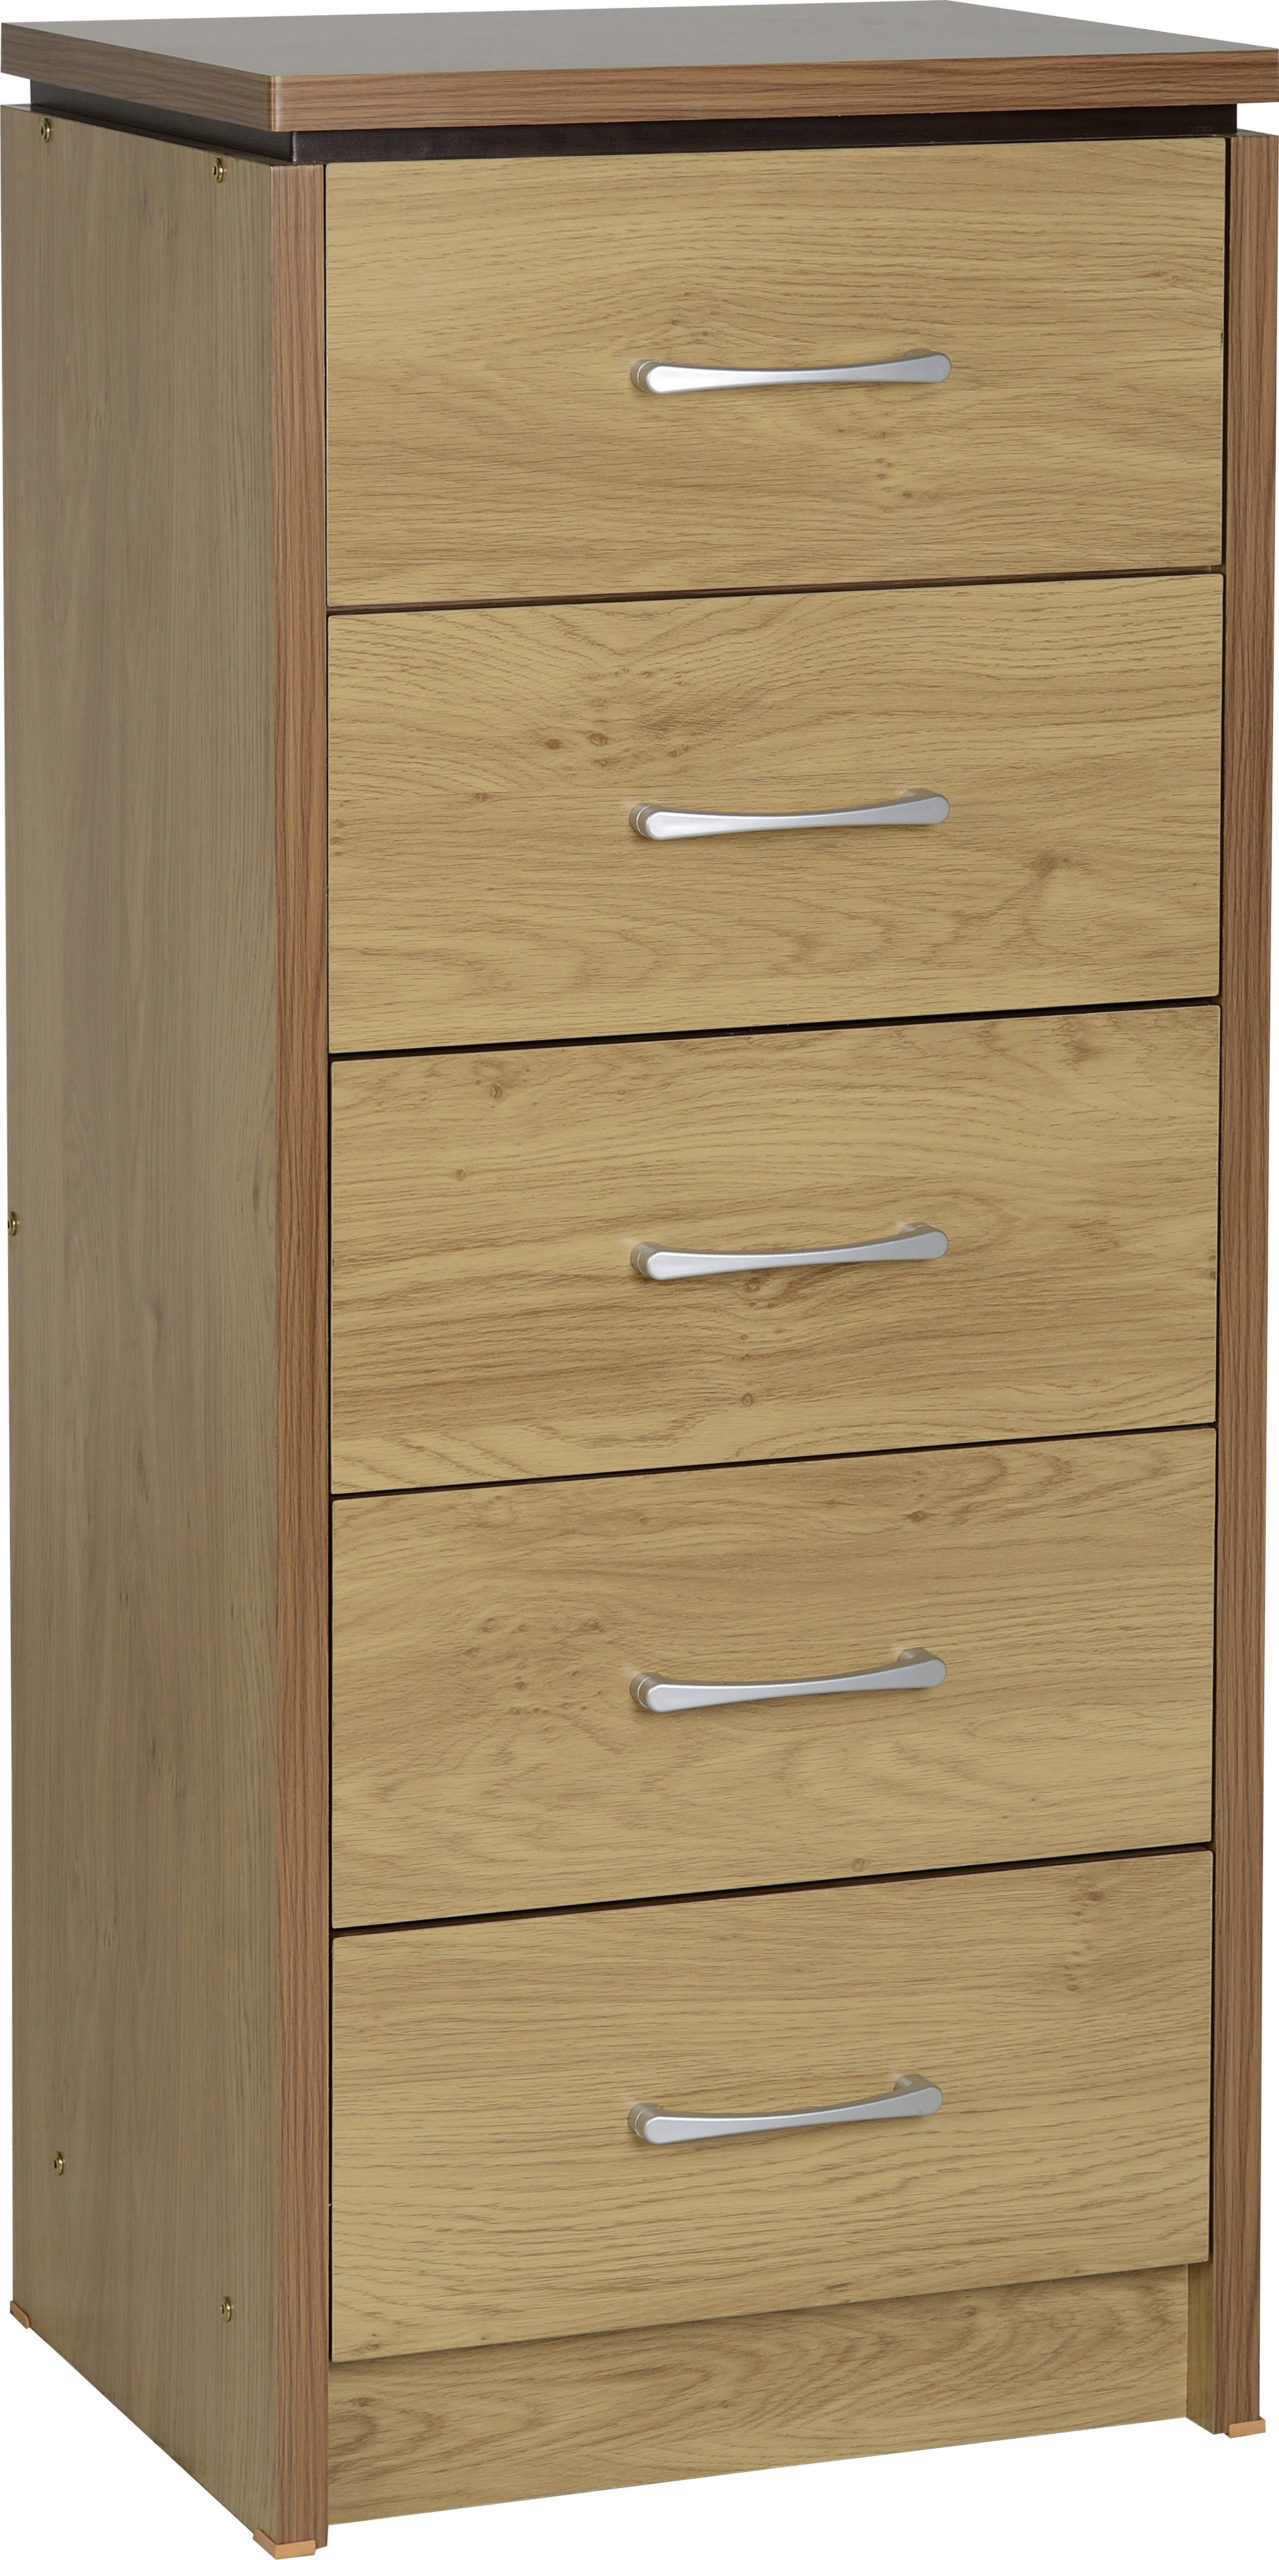 Charles 5 Drawer Narrow Chest In Oak Effect Veneer - Click Image to Close